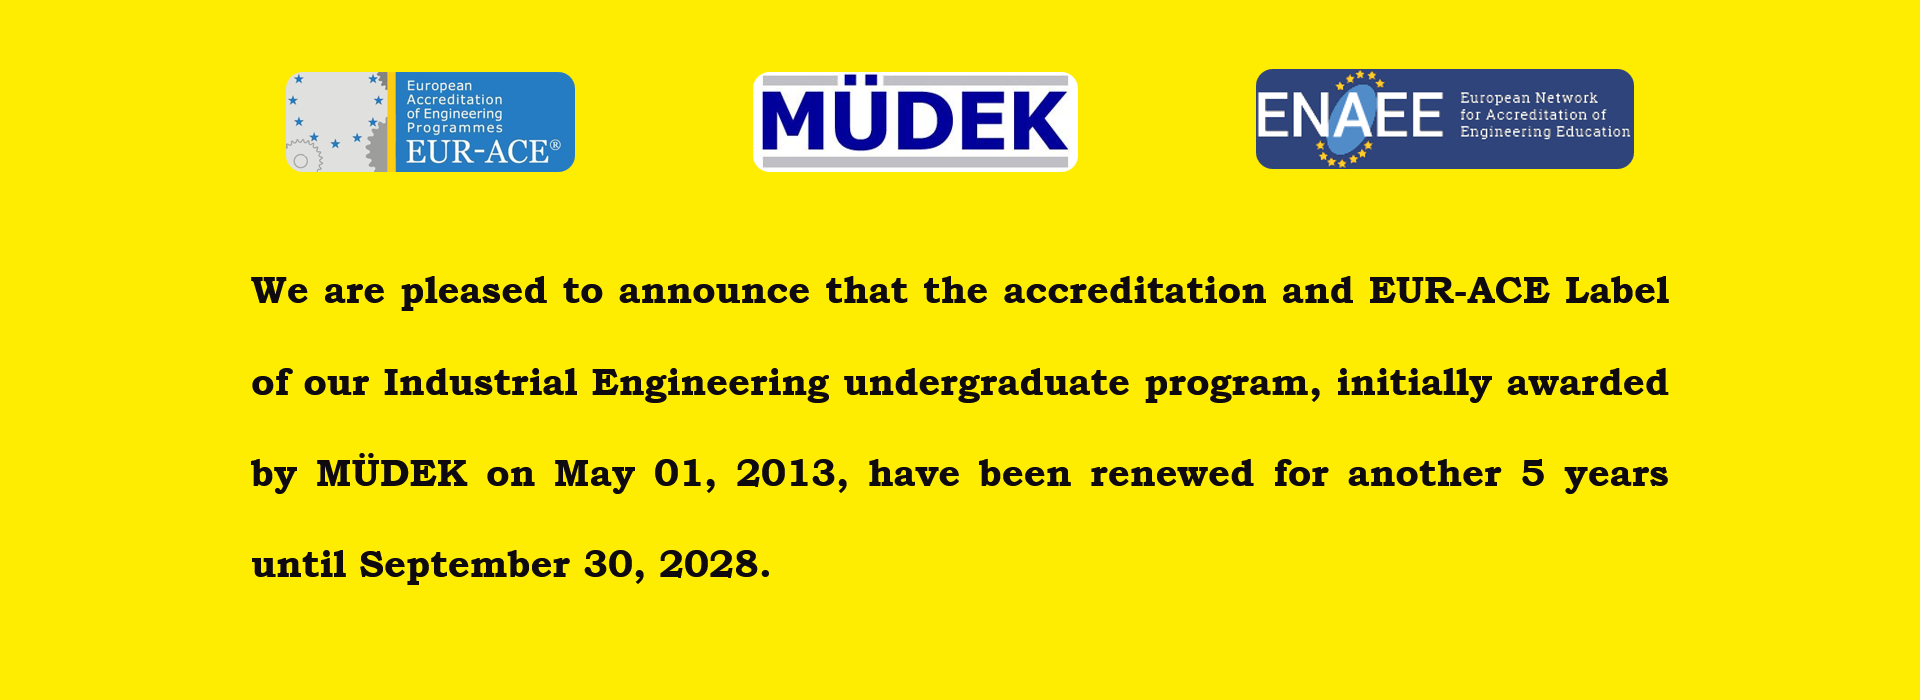 Our MÜDEK accreditation has been extended for another 5 years